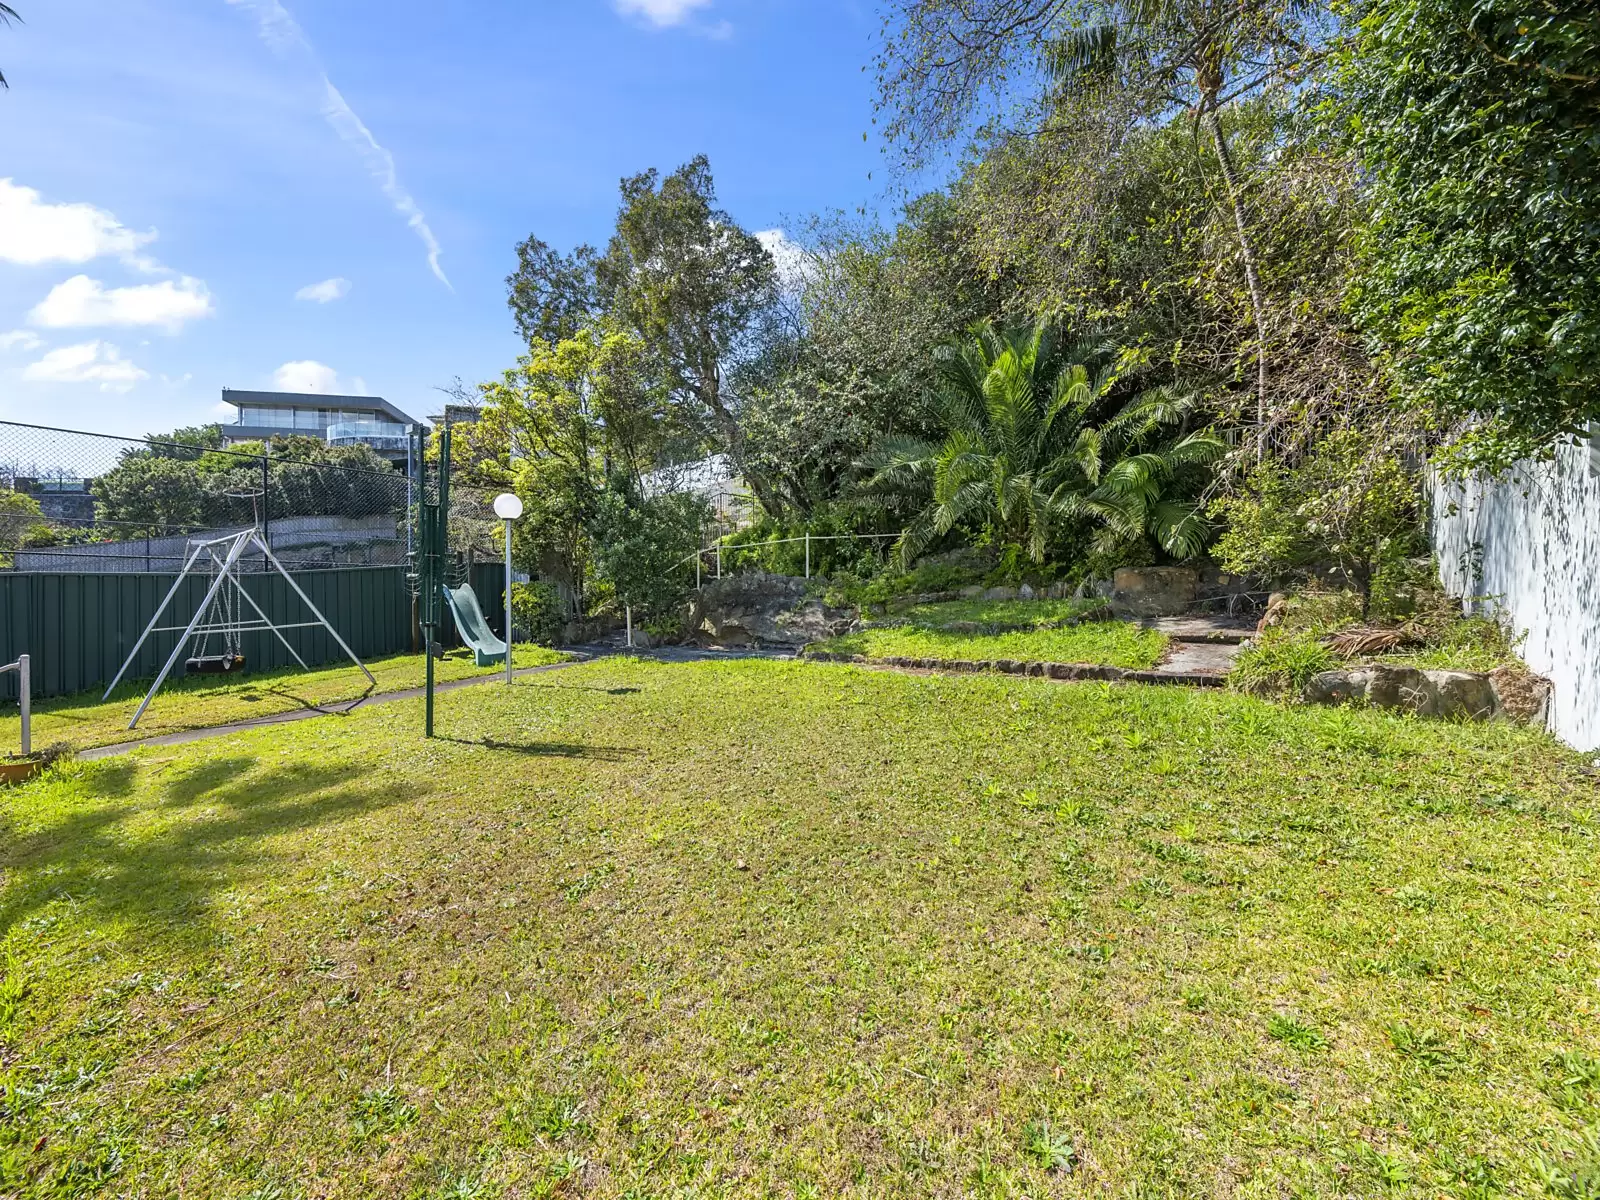 Photo #14: 23 Village High Road, Vaucluse - Sold by Sydney Sotheby's International Realty